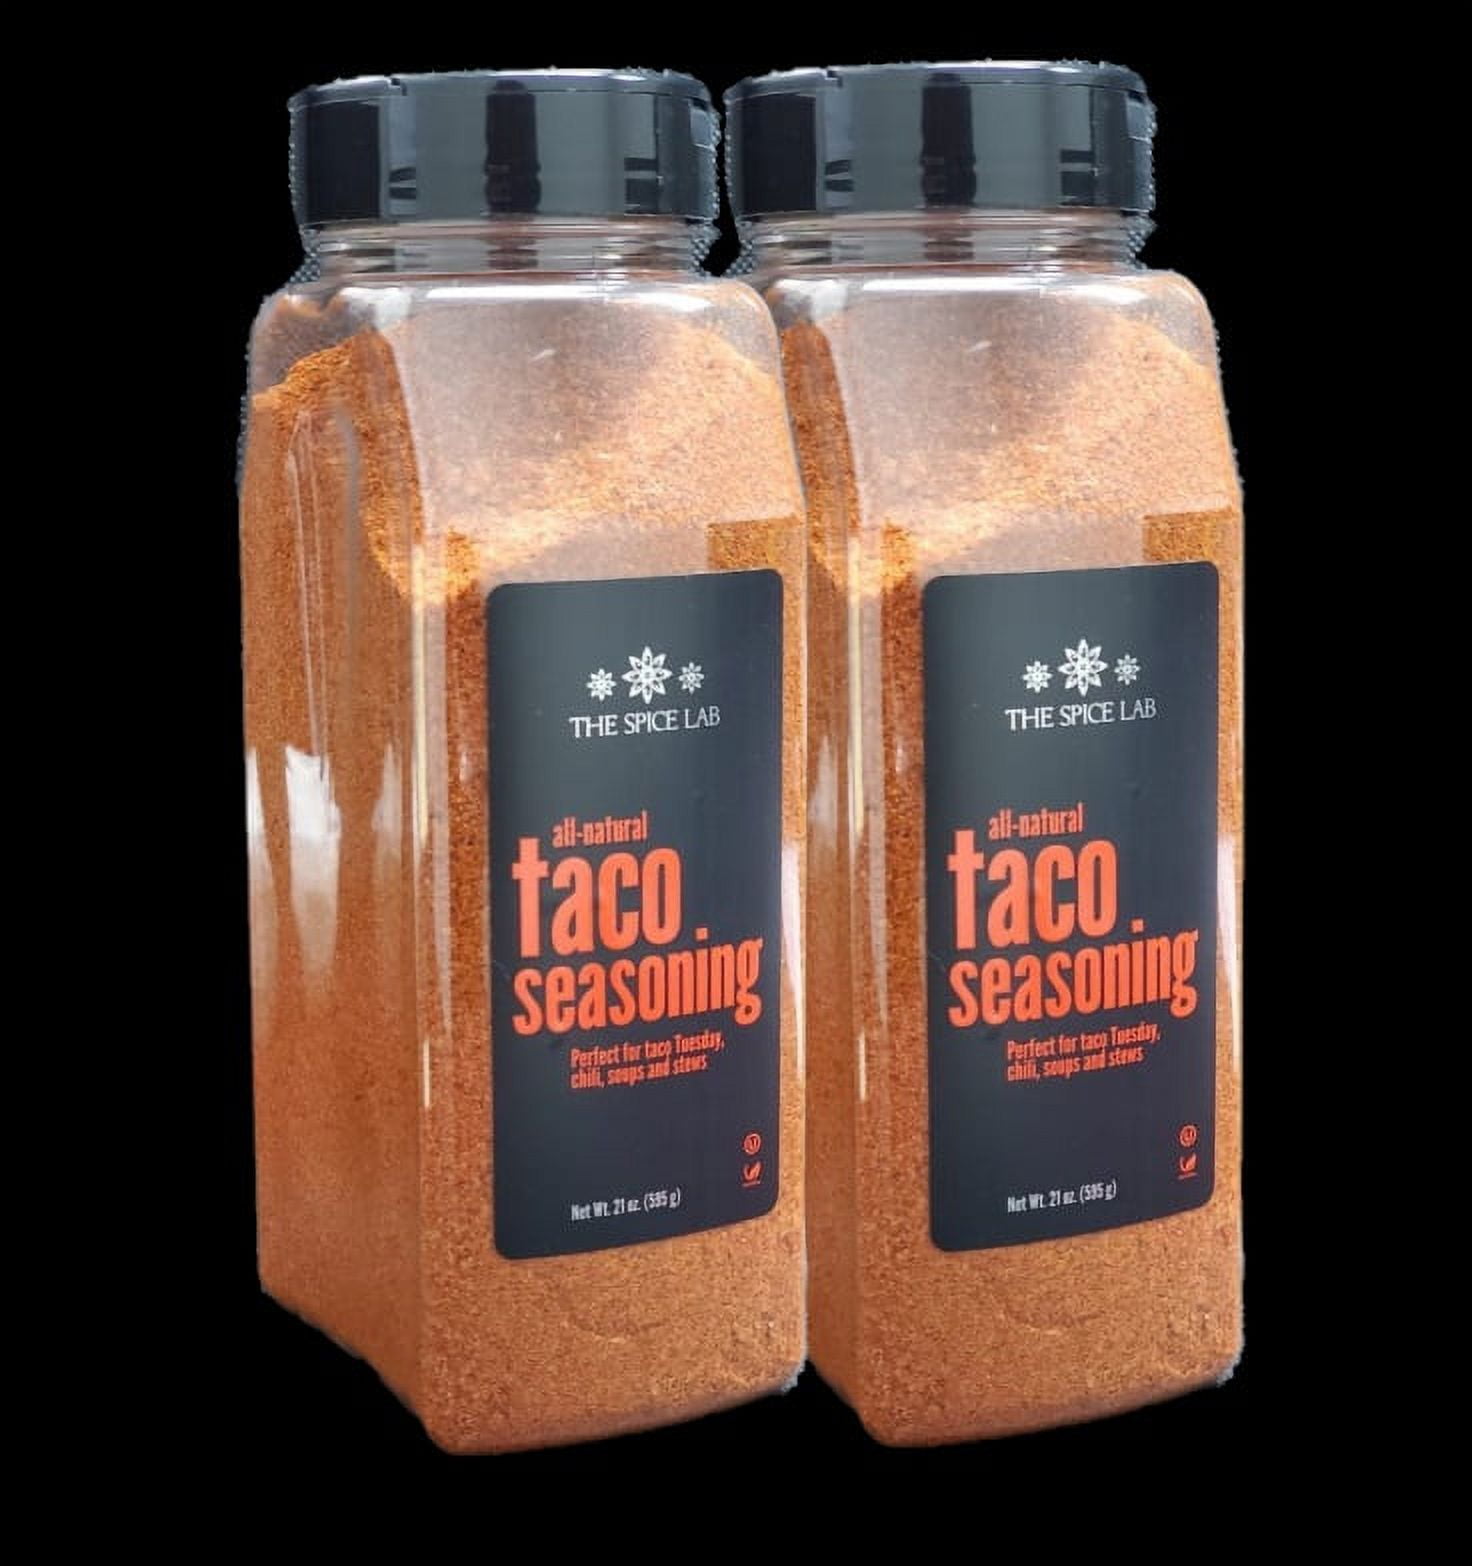 The Spice Lab Mexican Street Corn Seasoning - 5 ounces #7138